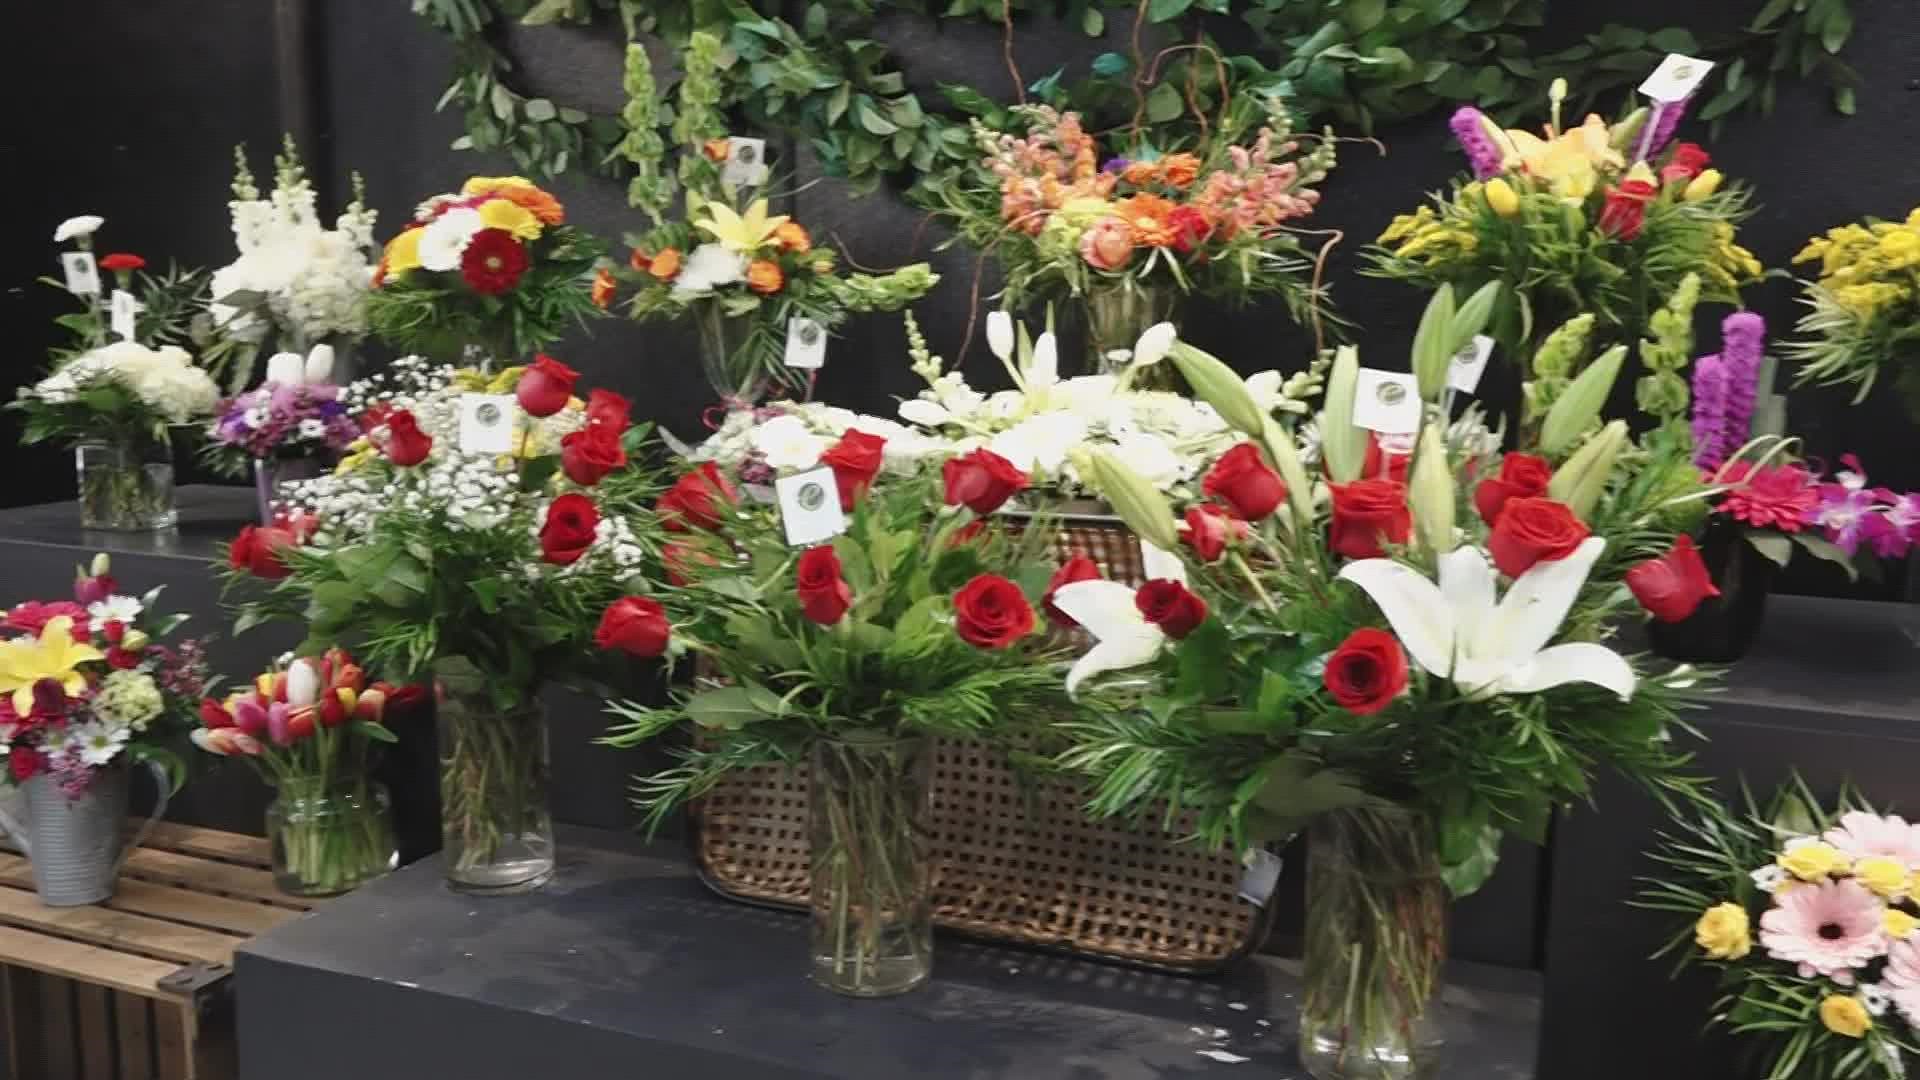 The price of flowers has increased because of supply chain issues and some retailers might have a hard time meeting Valentine's Day demand.